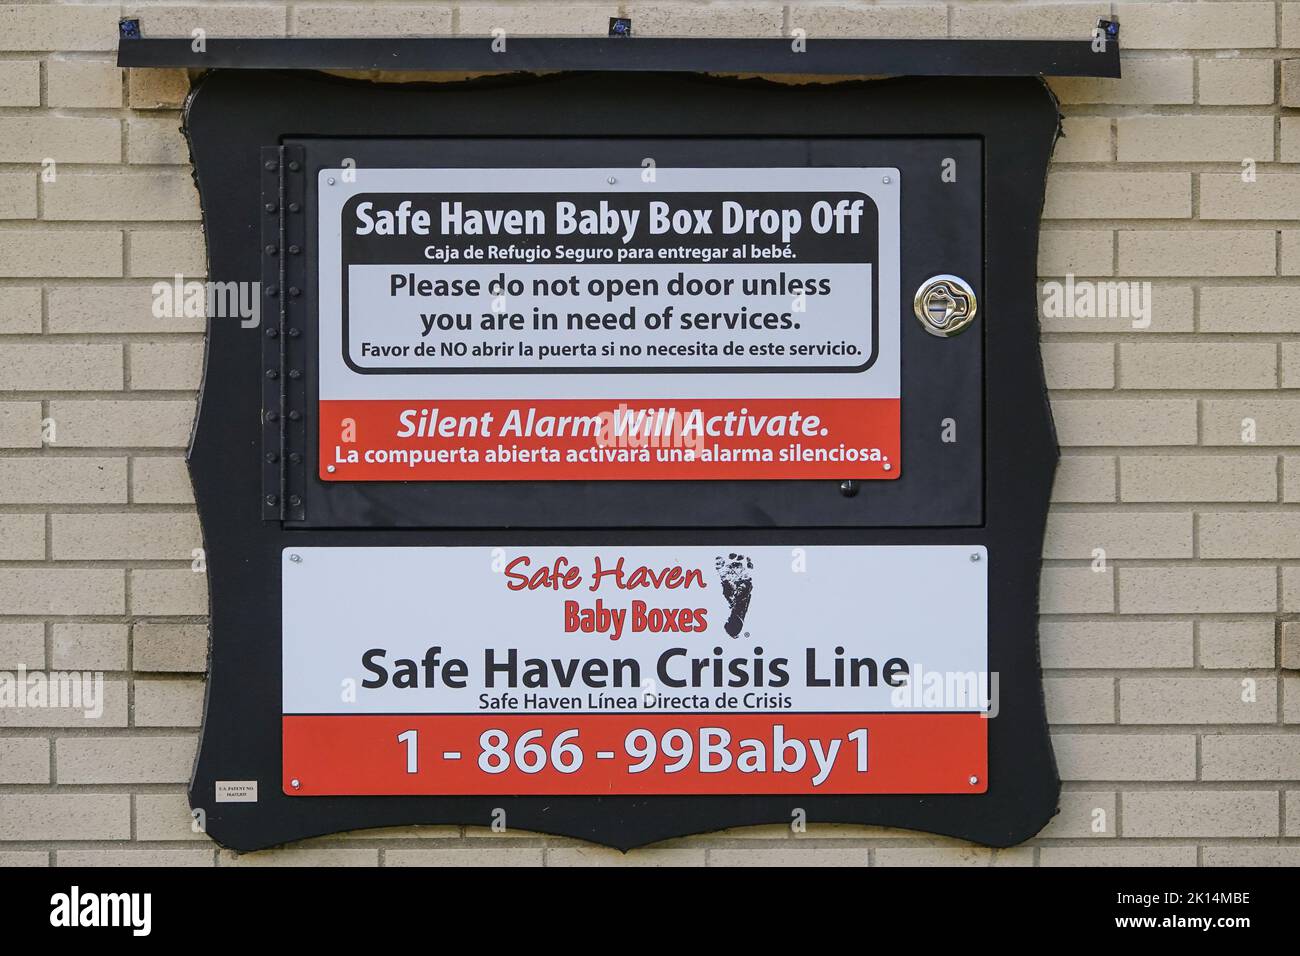 Safe haven Baby Box drop off in the wall of the Carmel Fire Department Station 45 near Indianapolis, September 7, 2022 in Carmel, Indiana. Stock Photo